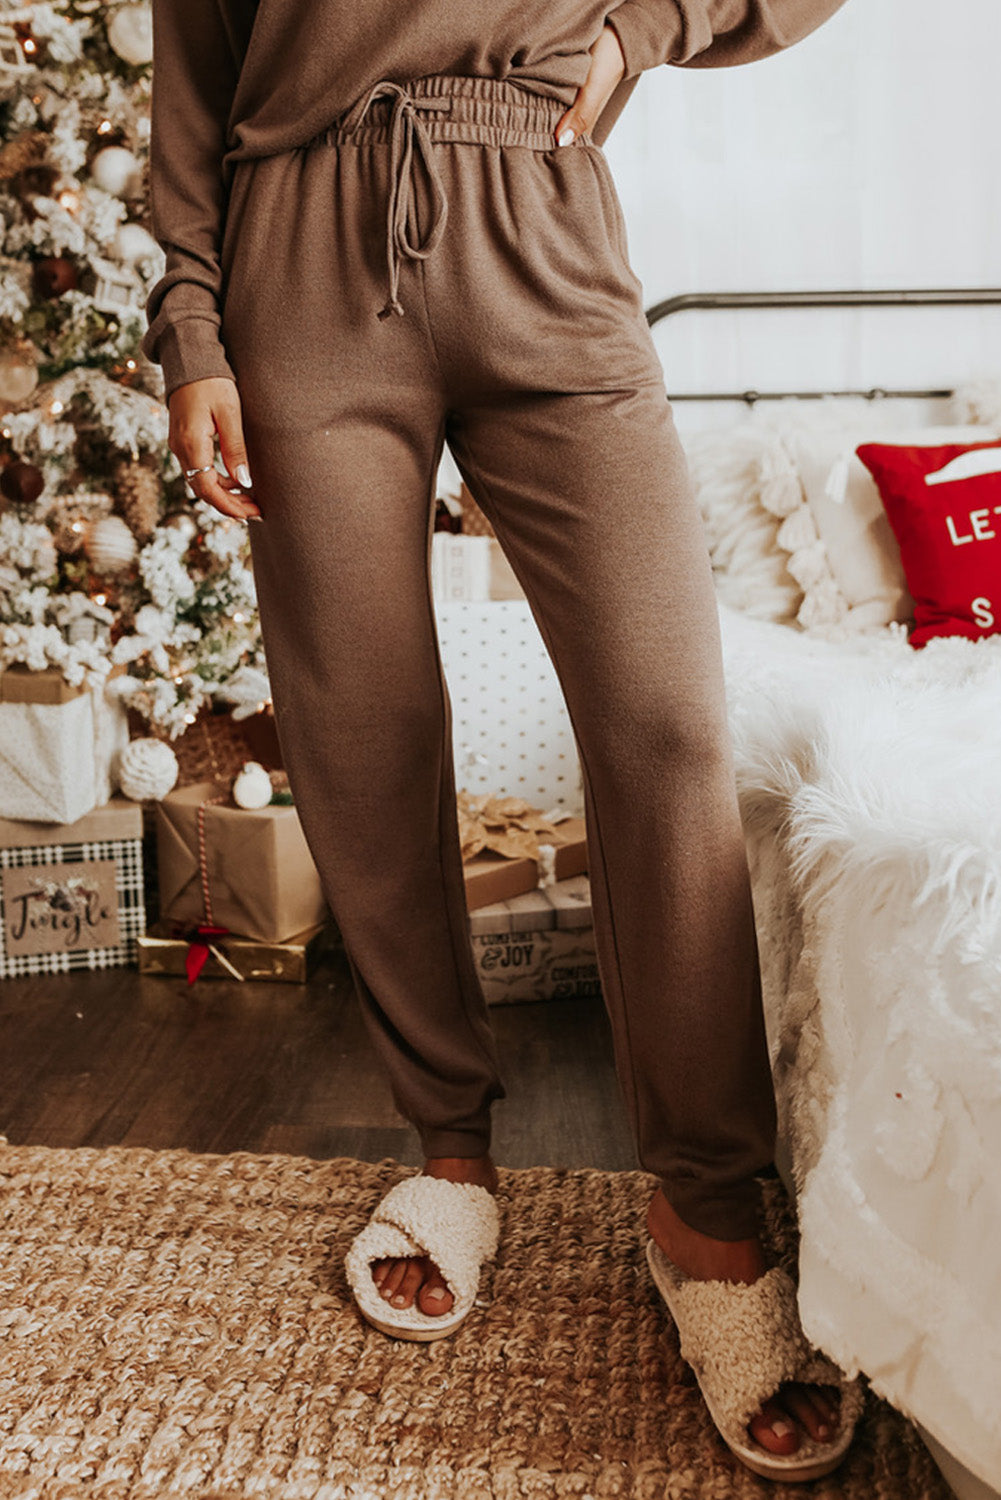 LC15306-16-S, LC15306-16-M, LC15306-16-L, LC15306-16-XL, LC15306-16-2XL, Khaki Women's Long Sleeve Sweatsuit Set Pullover and Jogger Pants Lounge Set